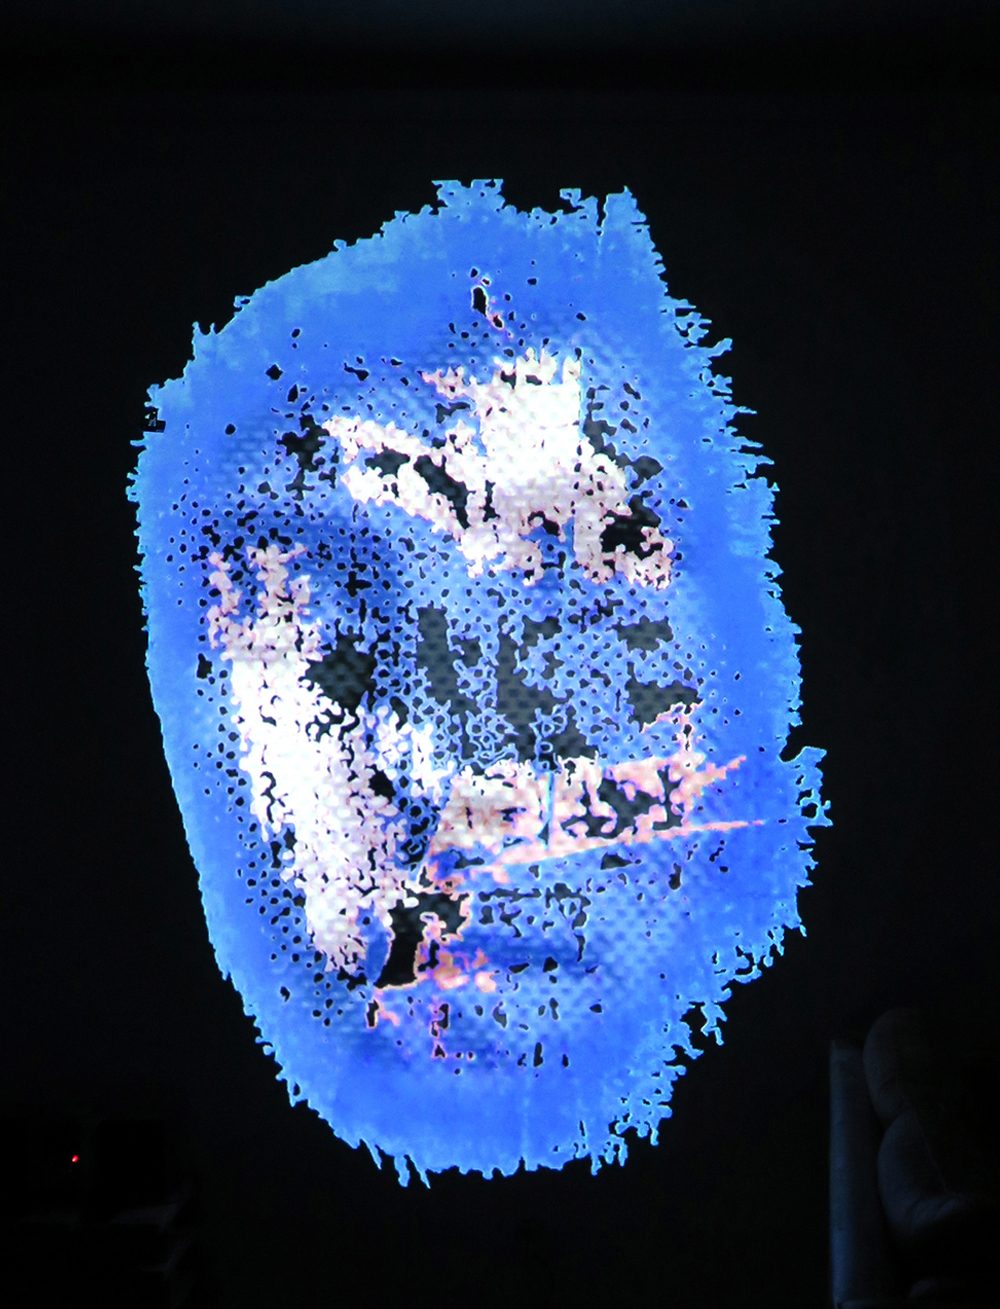 48 portraits projection1 by artist Marianne Casmose1